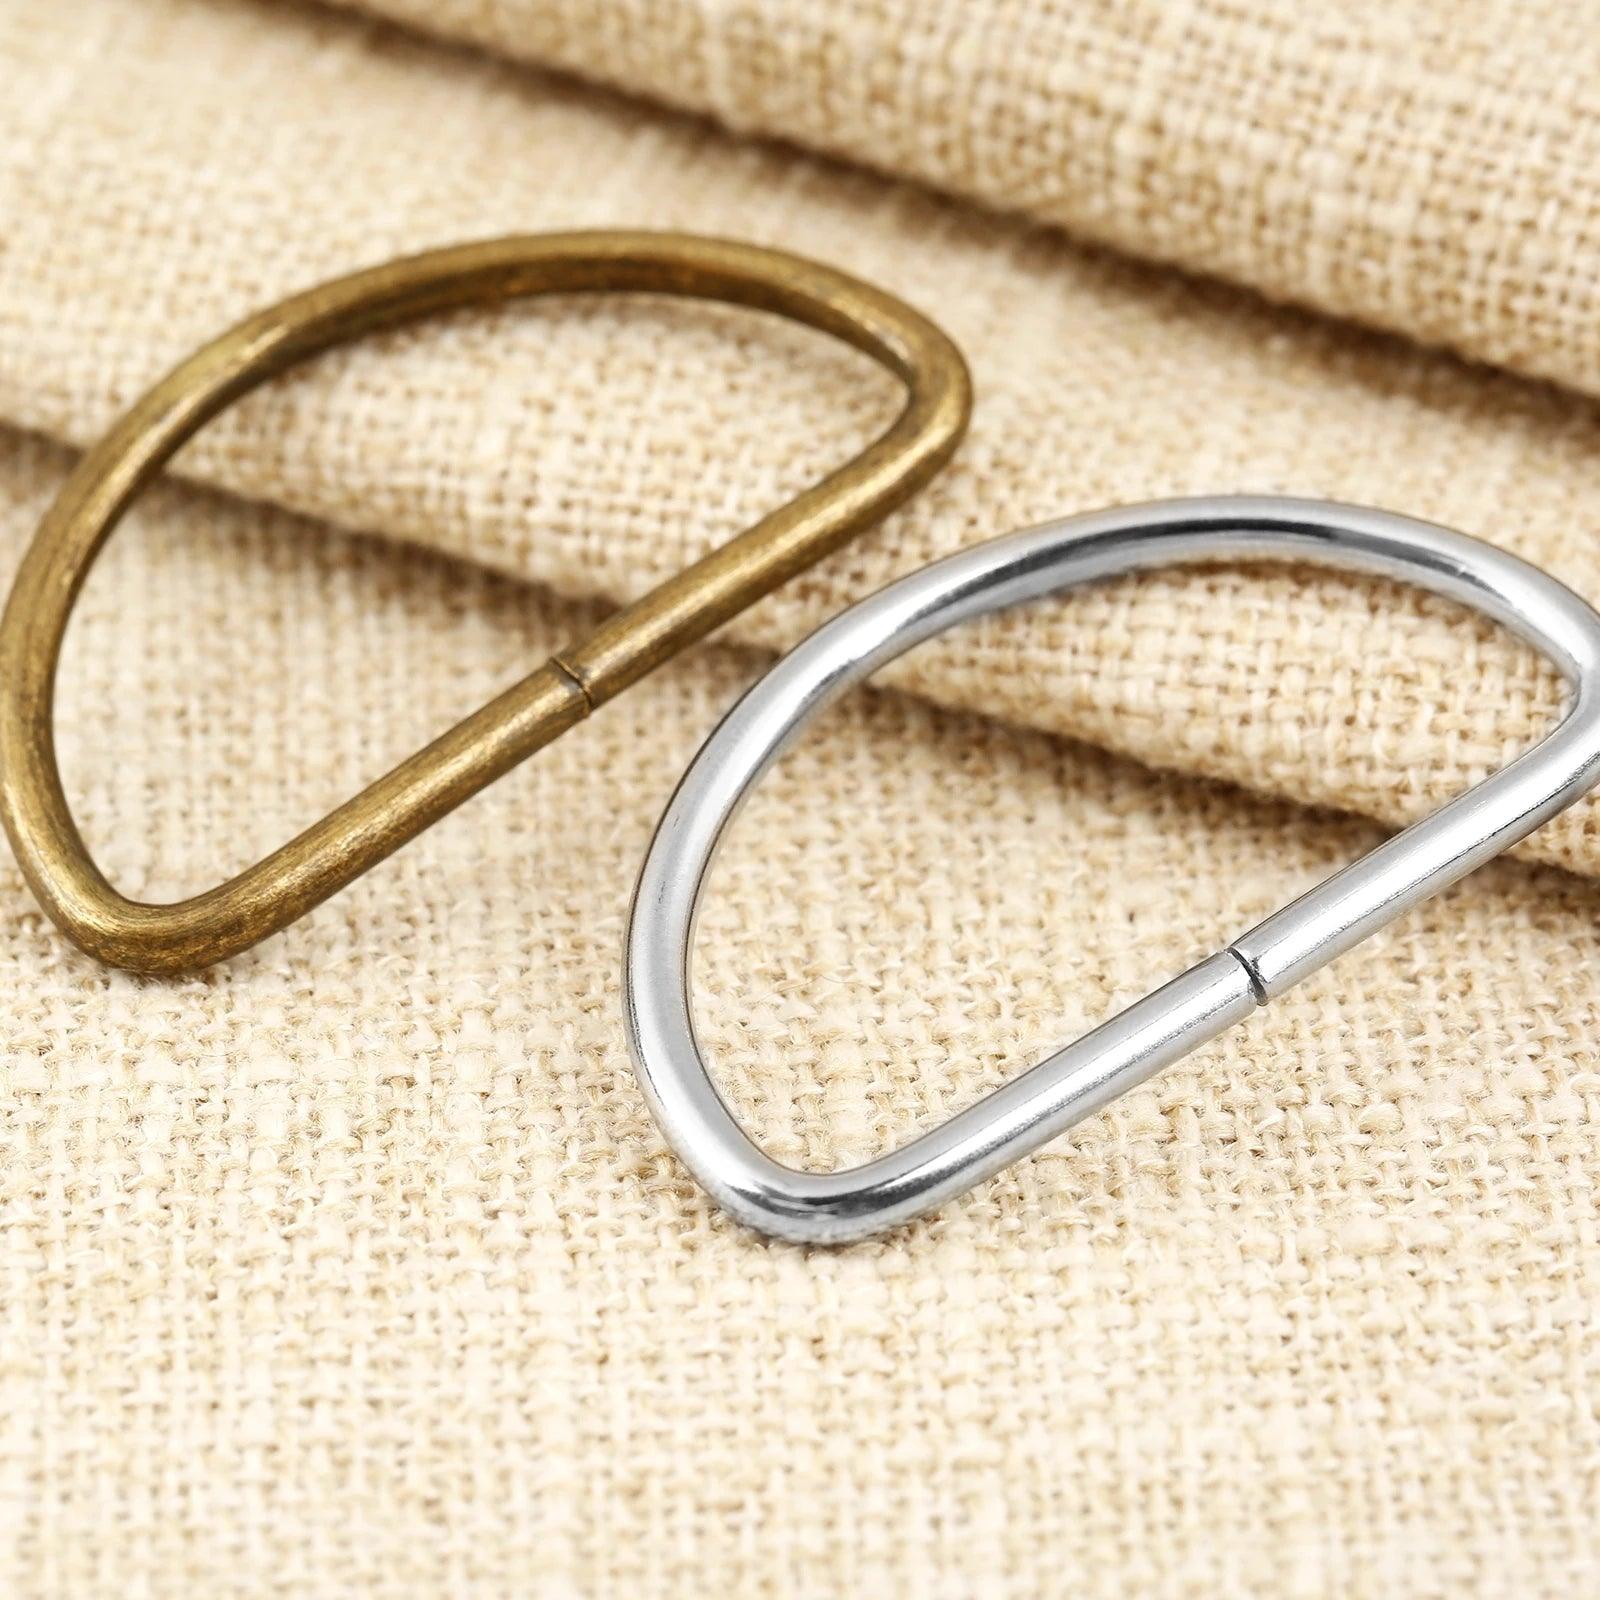 Vintage Metal D Ring Buckles Set for DIY Sewing and Handmade Projects - Pack of 20  ourlum.com   